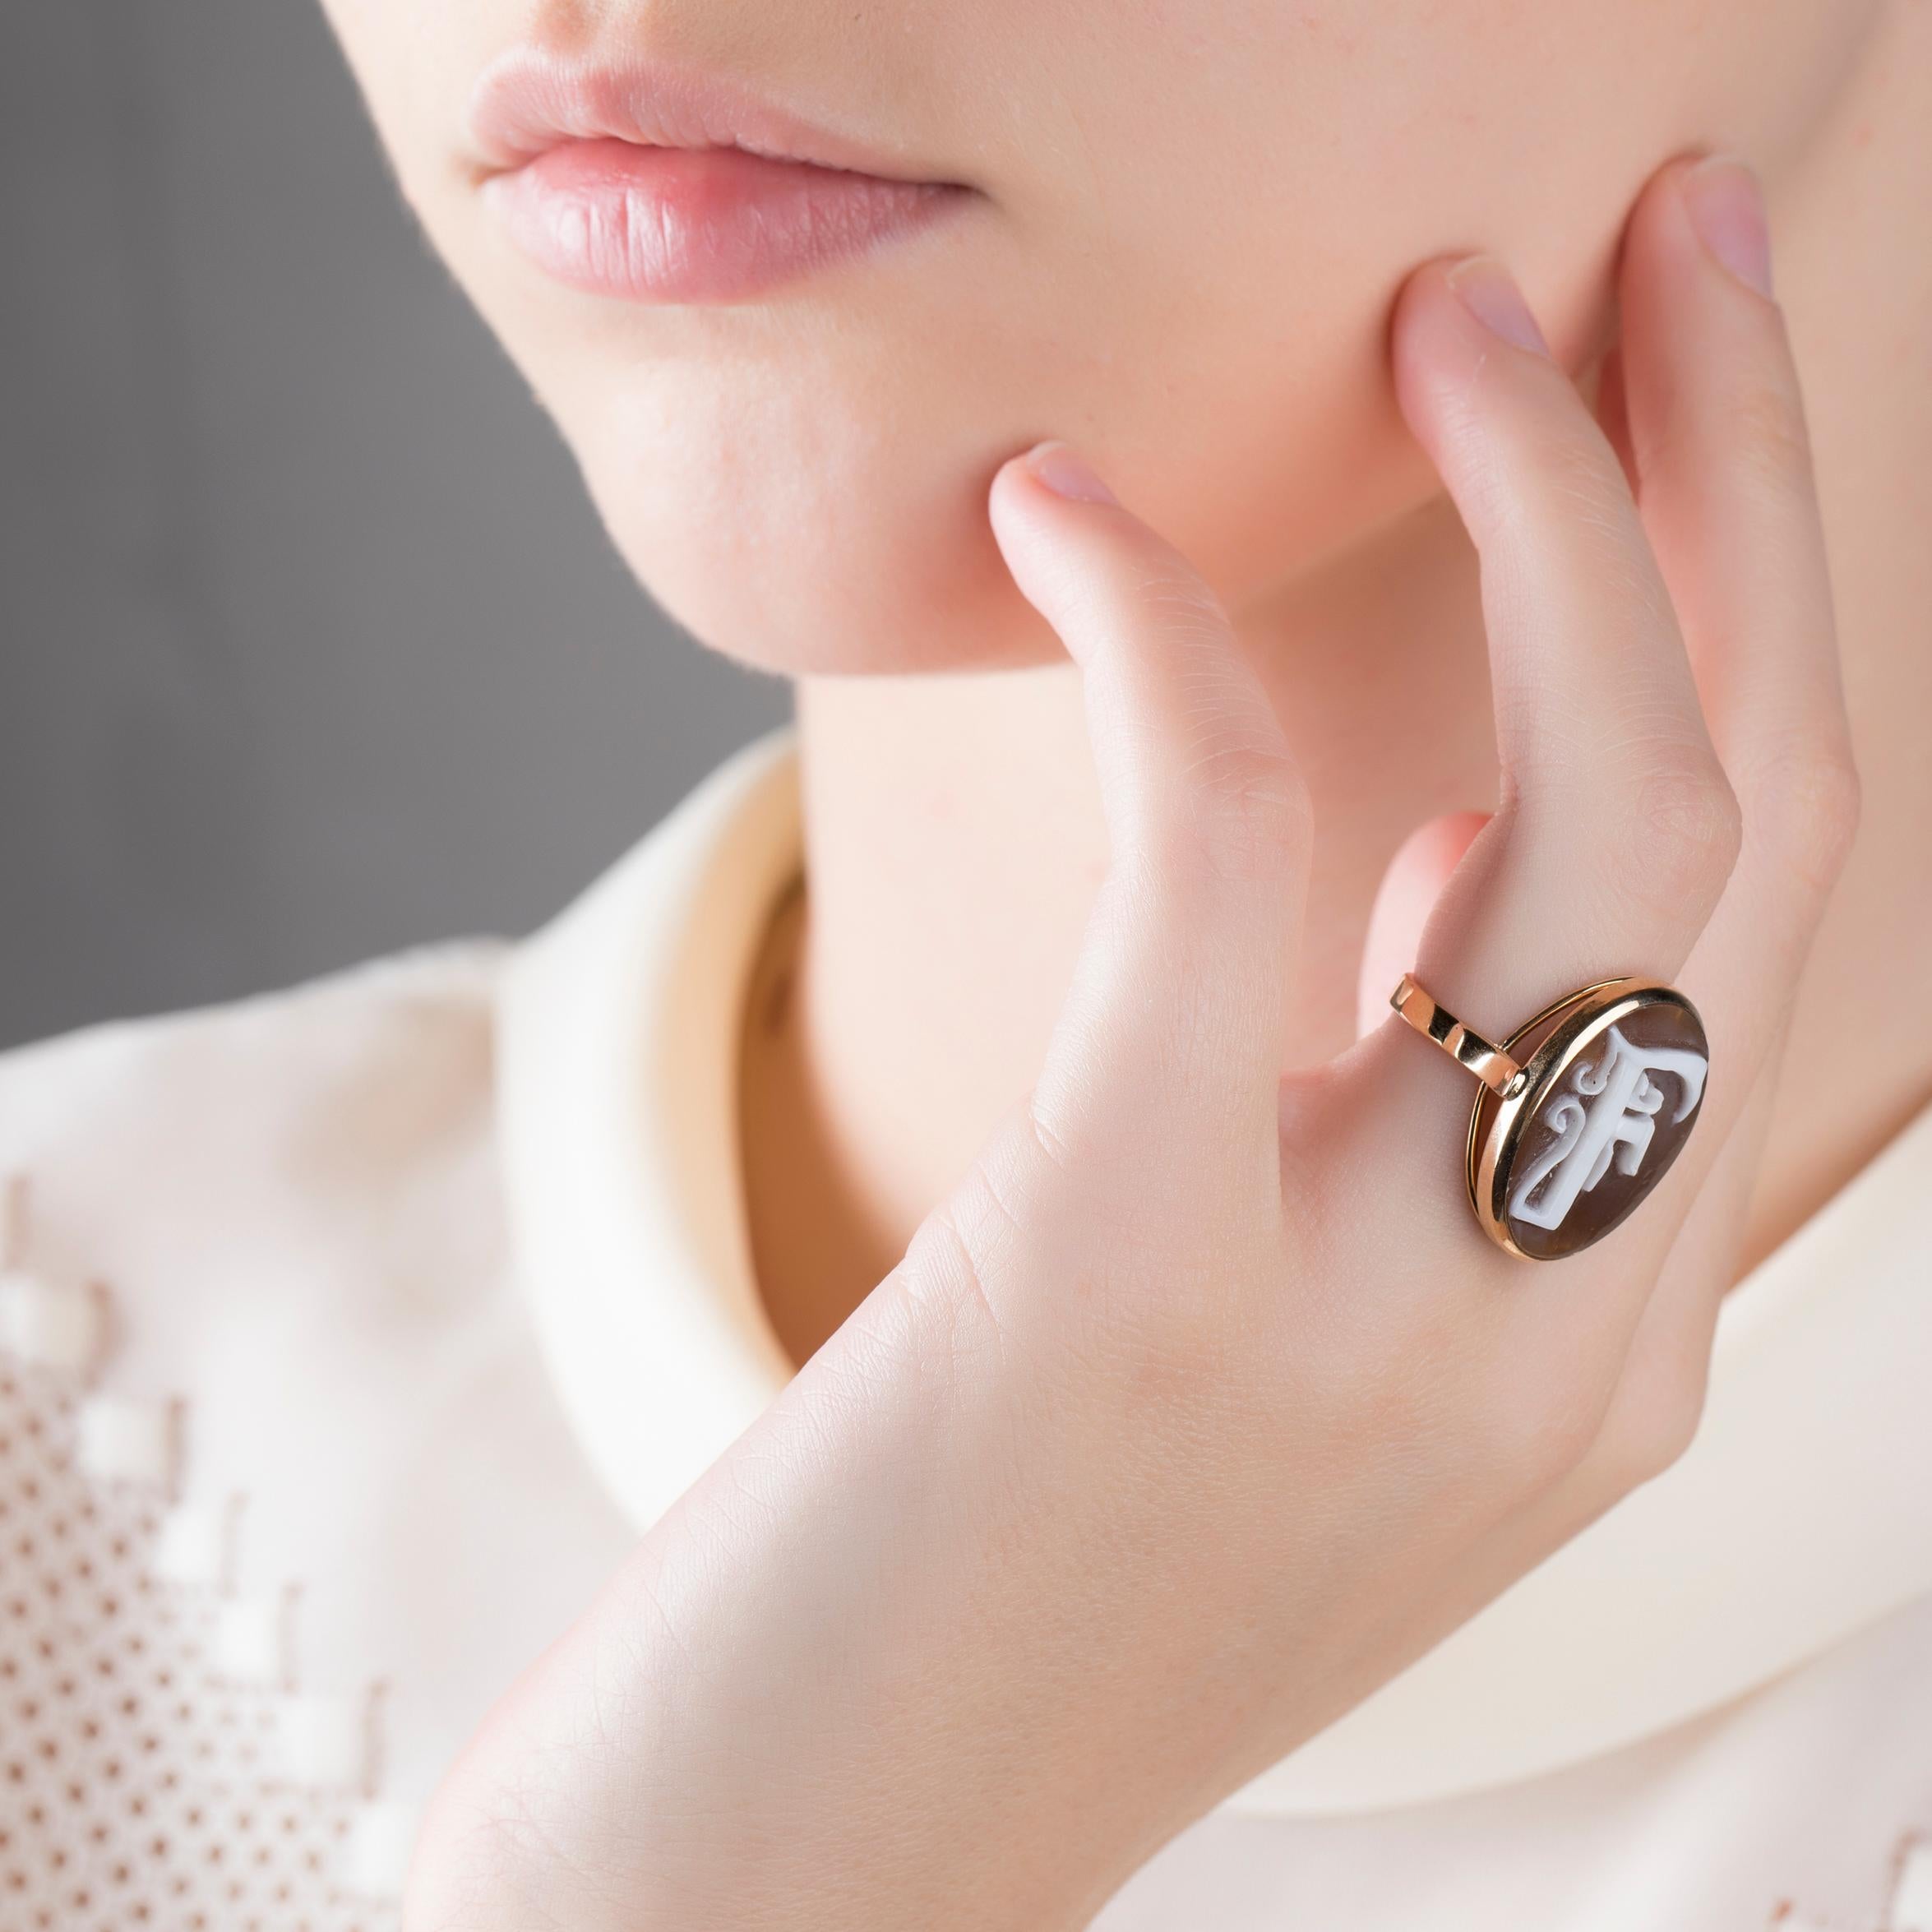 Unique and unisex, the cameo ring from IOSSELLIANI is designed to blend Victorian Age style and contemporary aesthetics into a harmonious balance between elegance and extra impact. The custom made ring is crafted with a 16x22mm magnificent oval